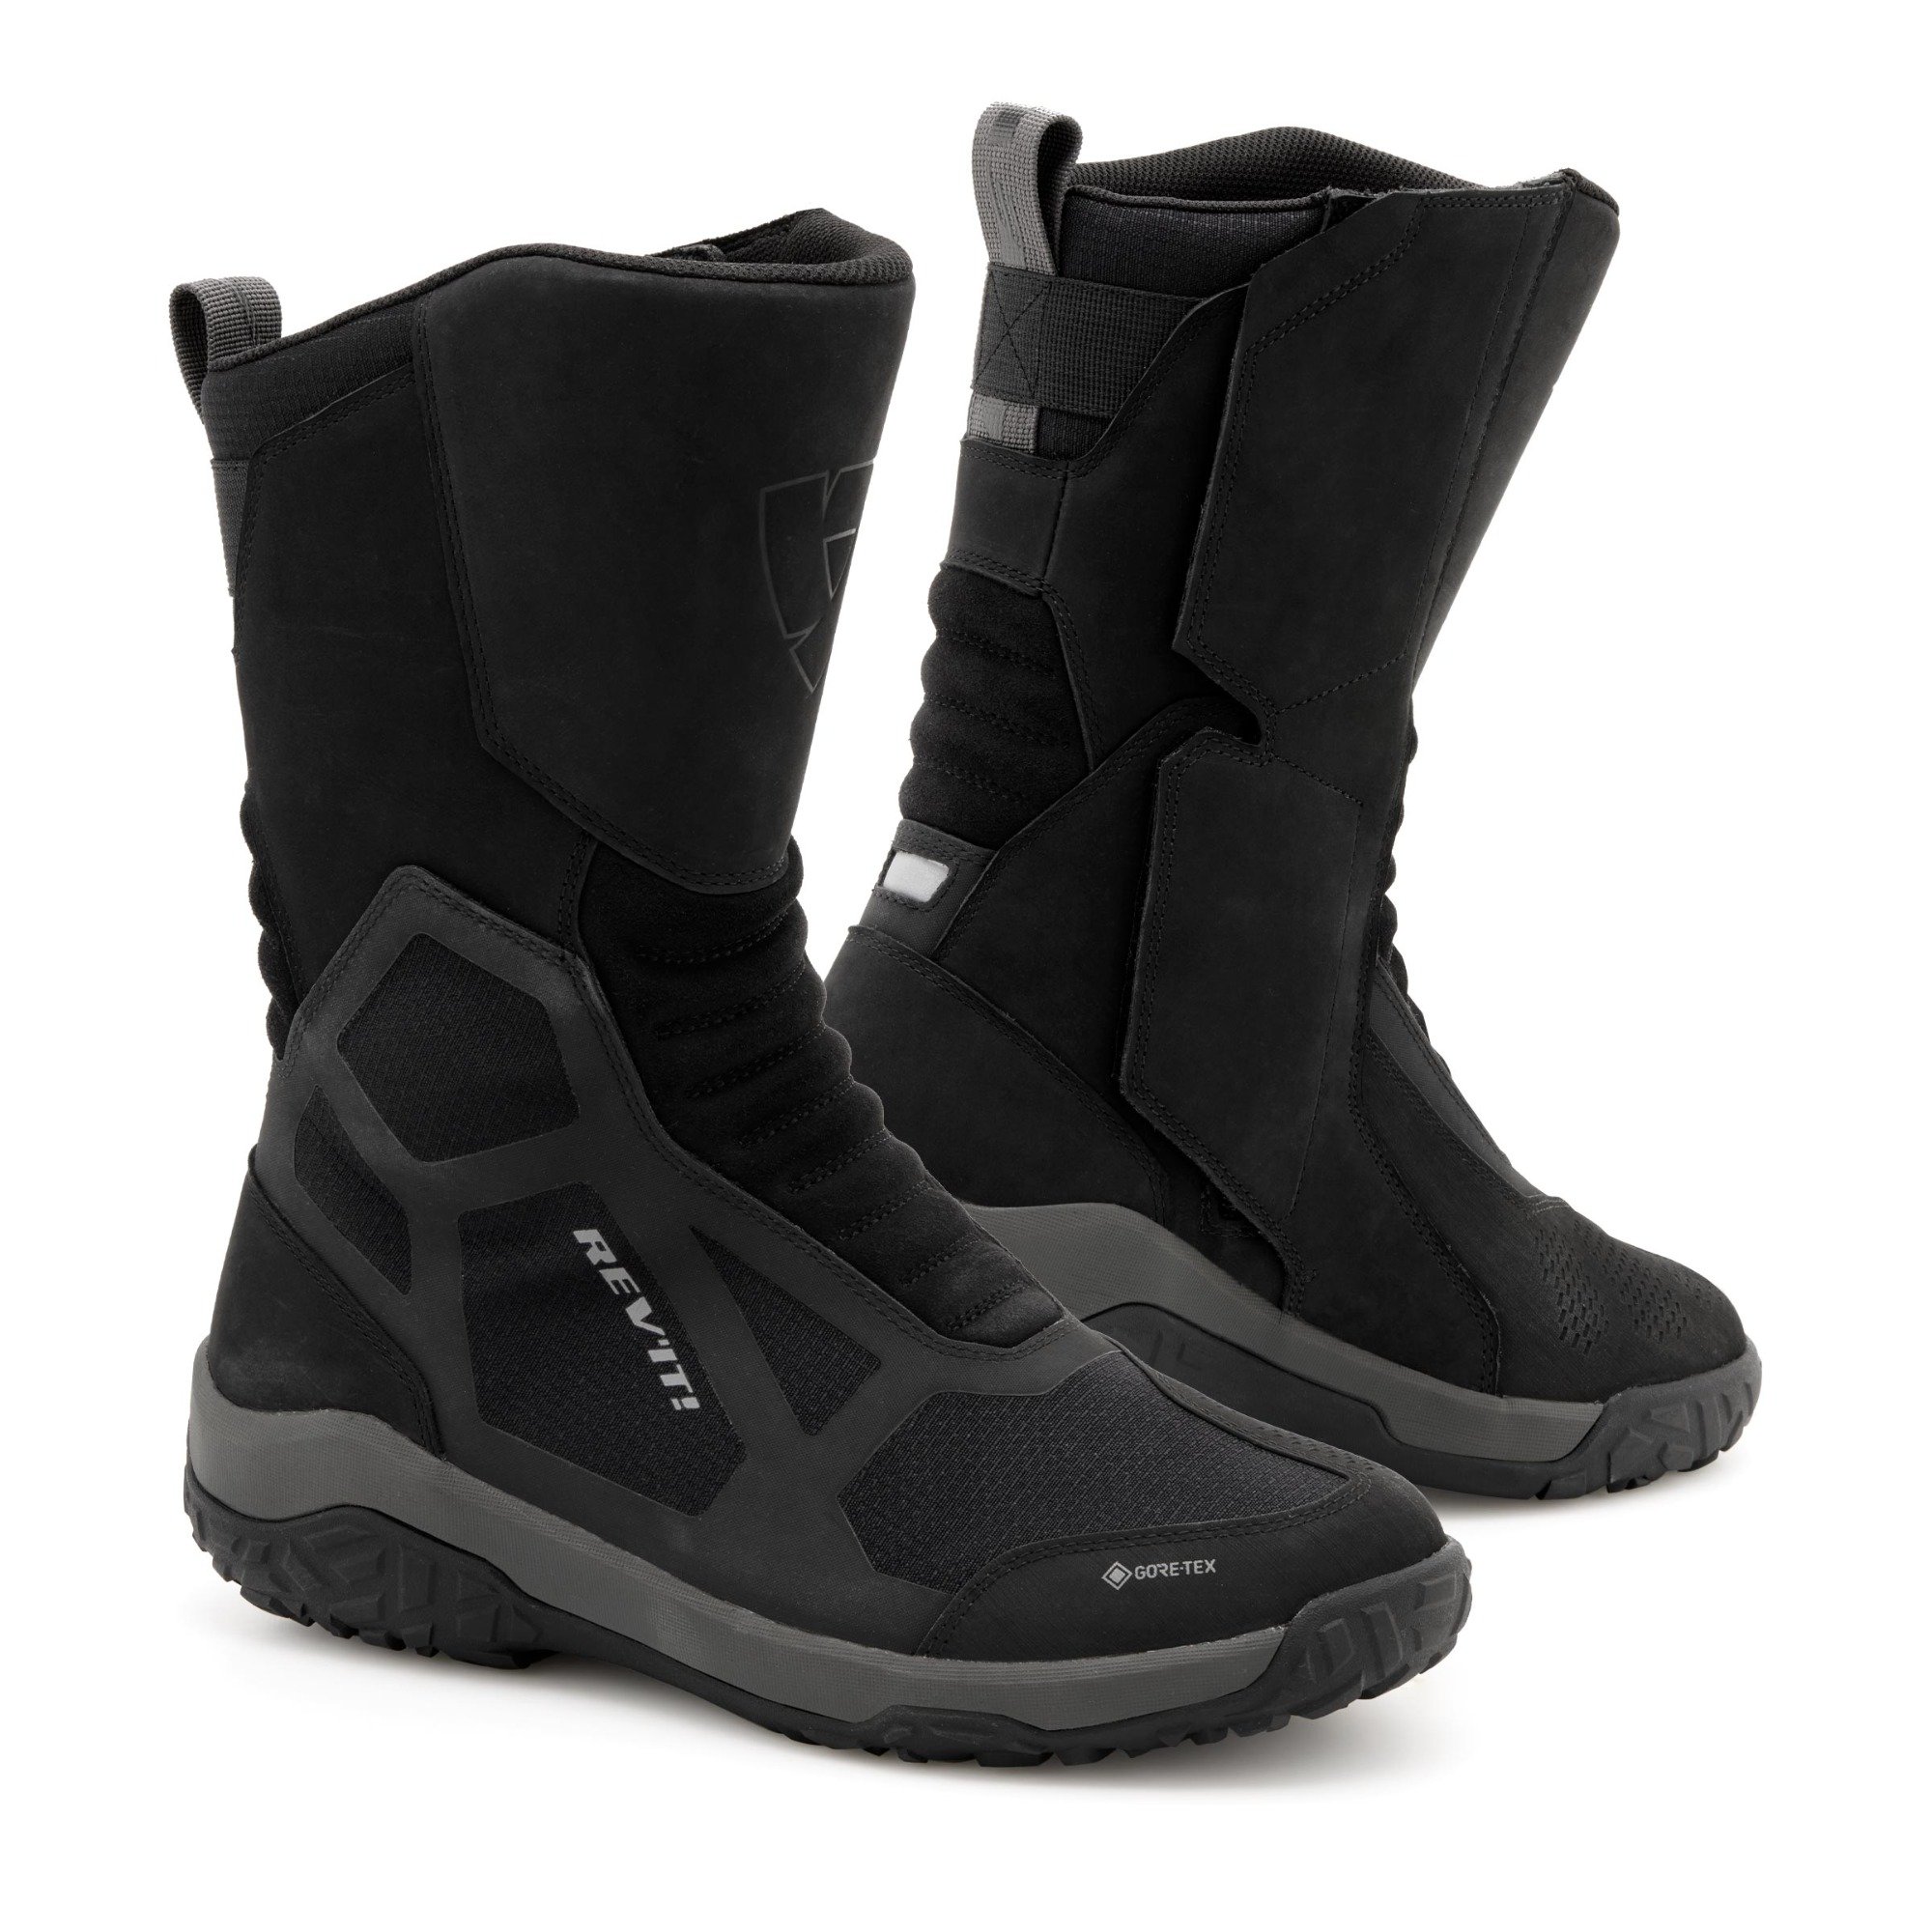 Image of REV'IT! Everest GTX Boots Black Size 44 ID 8700001328555